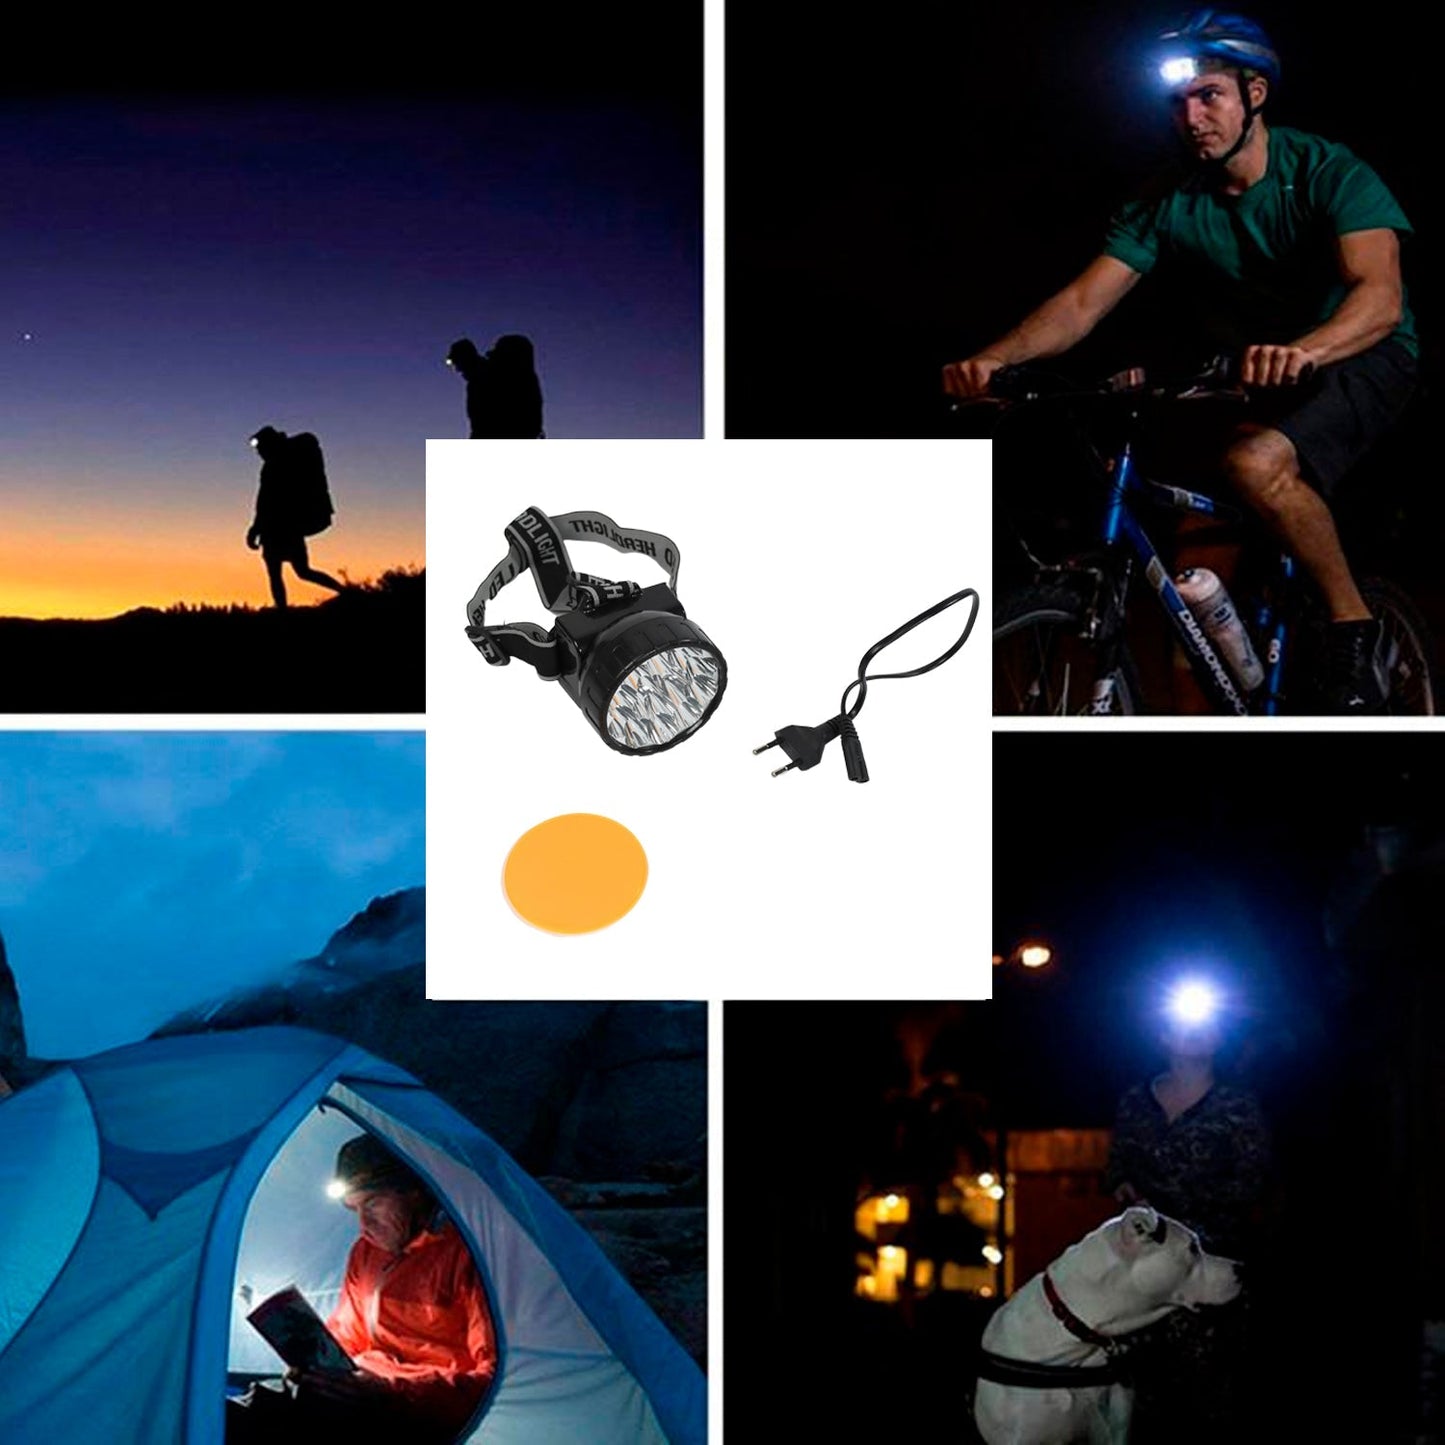 Head Lamp 15 Led Long Range Rechargeable Headlamp Adjustment Lamp Use For Farmers, Fishing, Camping, Hiking, Trekking, Cycling